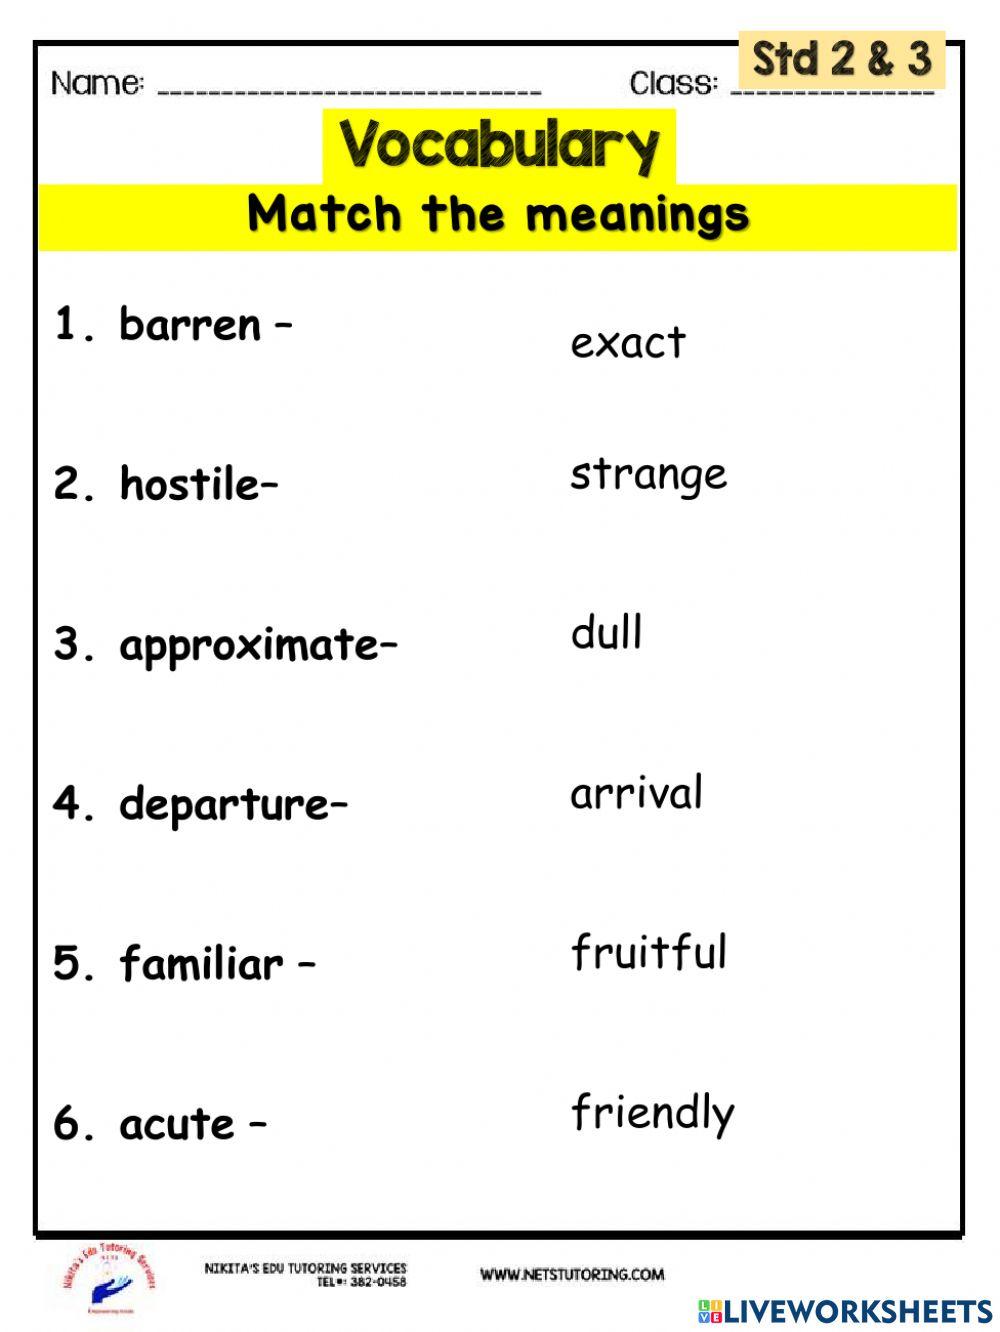 Spelling and Vocabulary Test 6